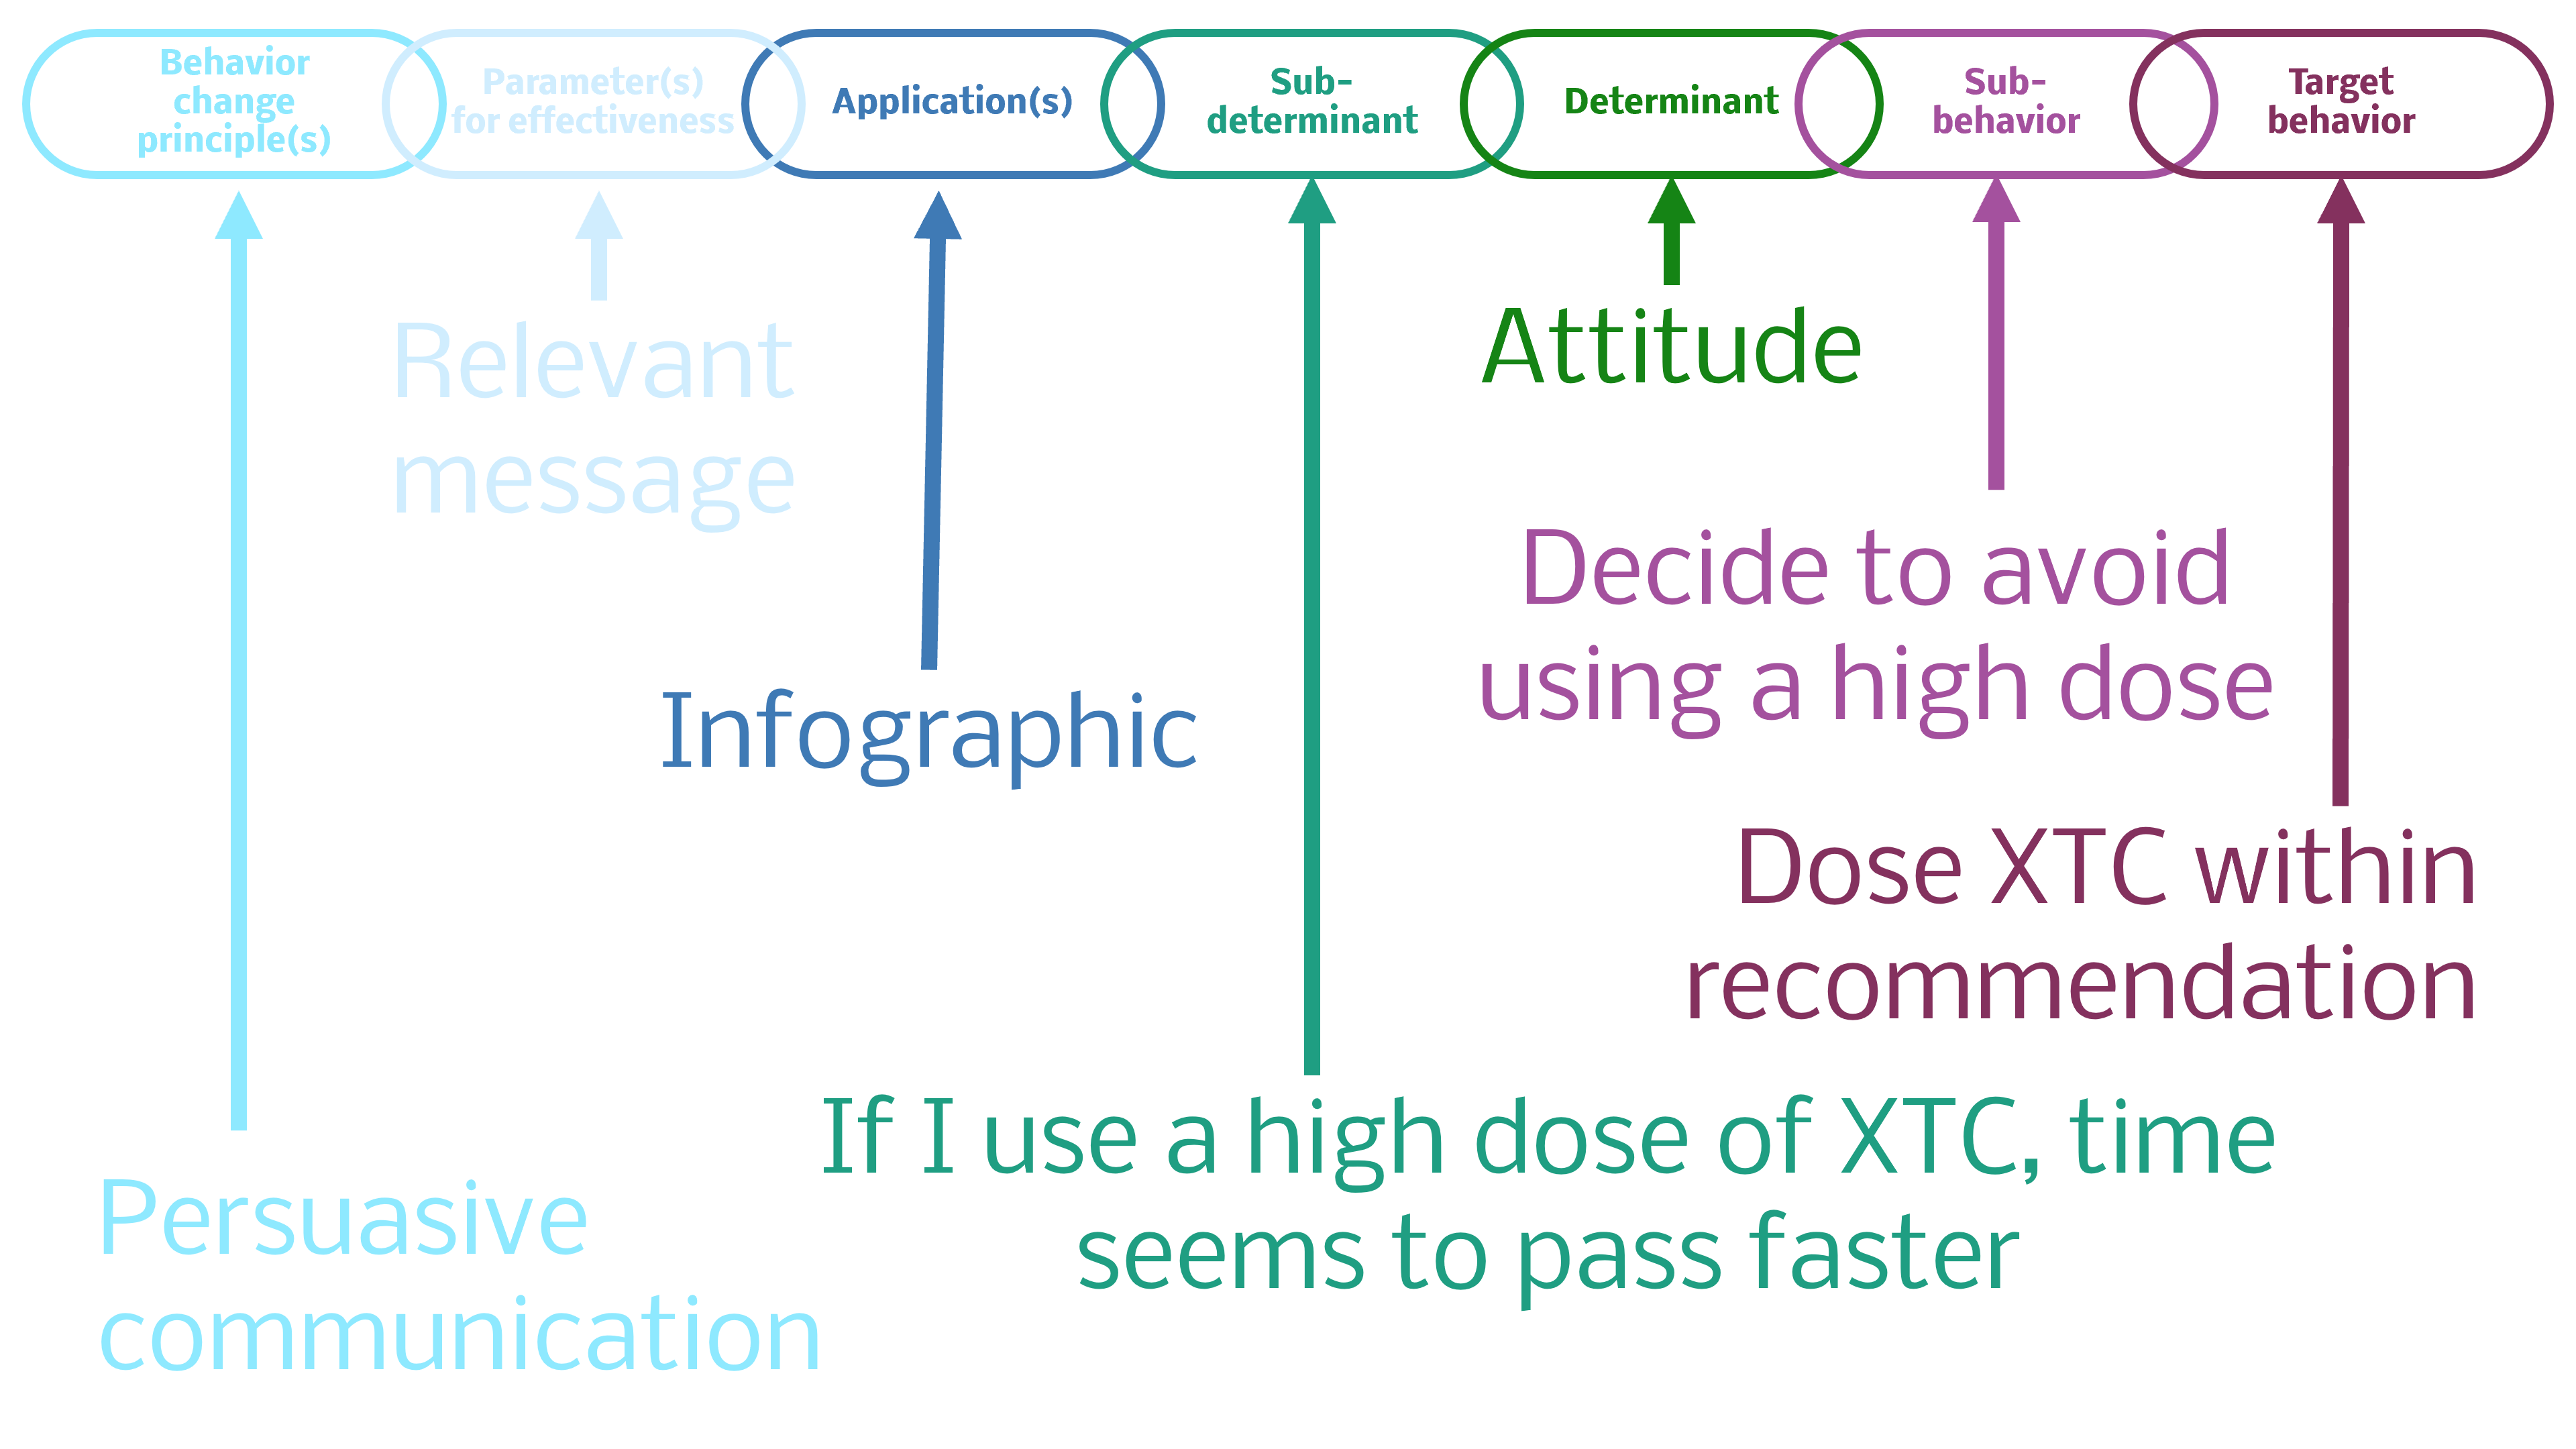 An example of the seven links of the causal-structural chain, from the behavior change principle (persuasive communication) to the parameters (relevant message) to an application (infographic) which then targets a subd-determinant (the belief 'if I use a high dose of XTC, time seems to pass faster'), part of determinant Attitude, causing a sub-behavior (decide to use a high dose) and ultimately, the target behavior (dose XTC within the recommendation).